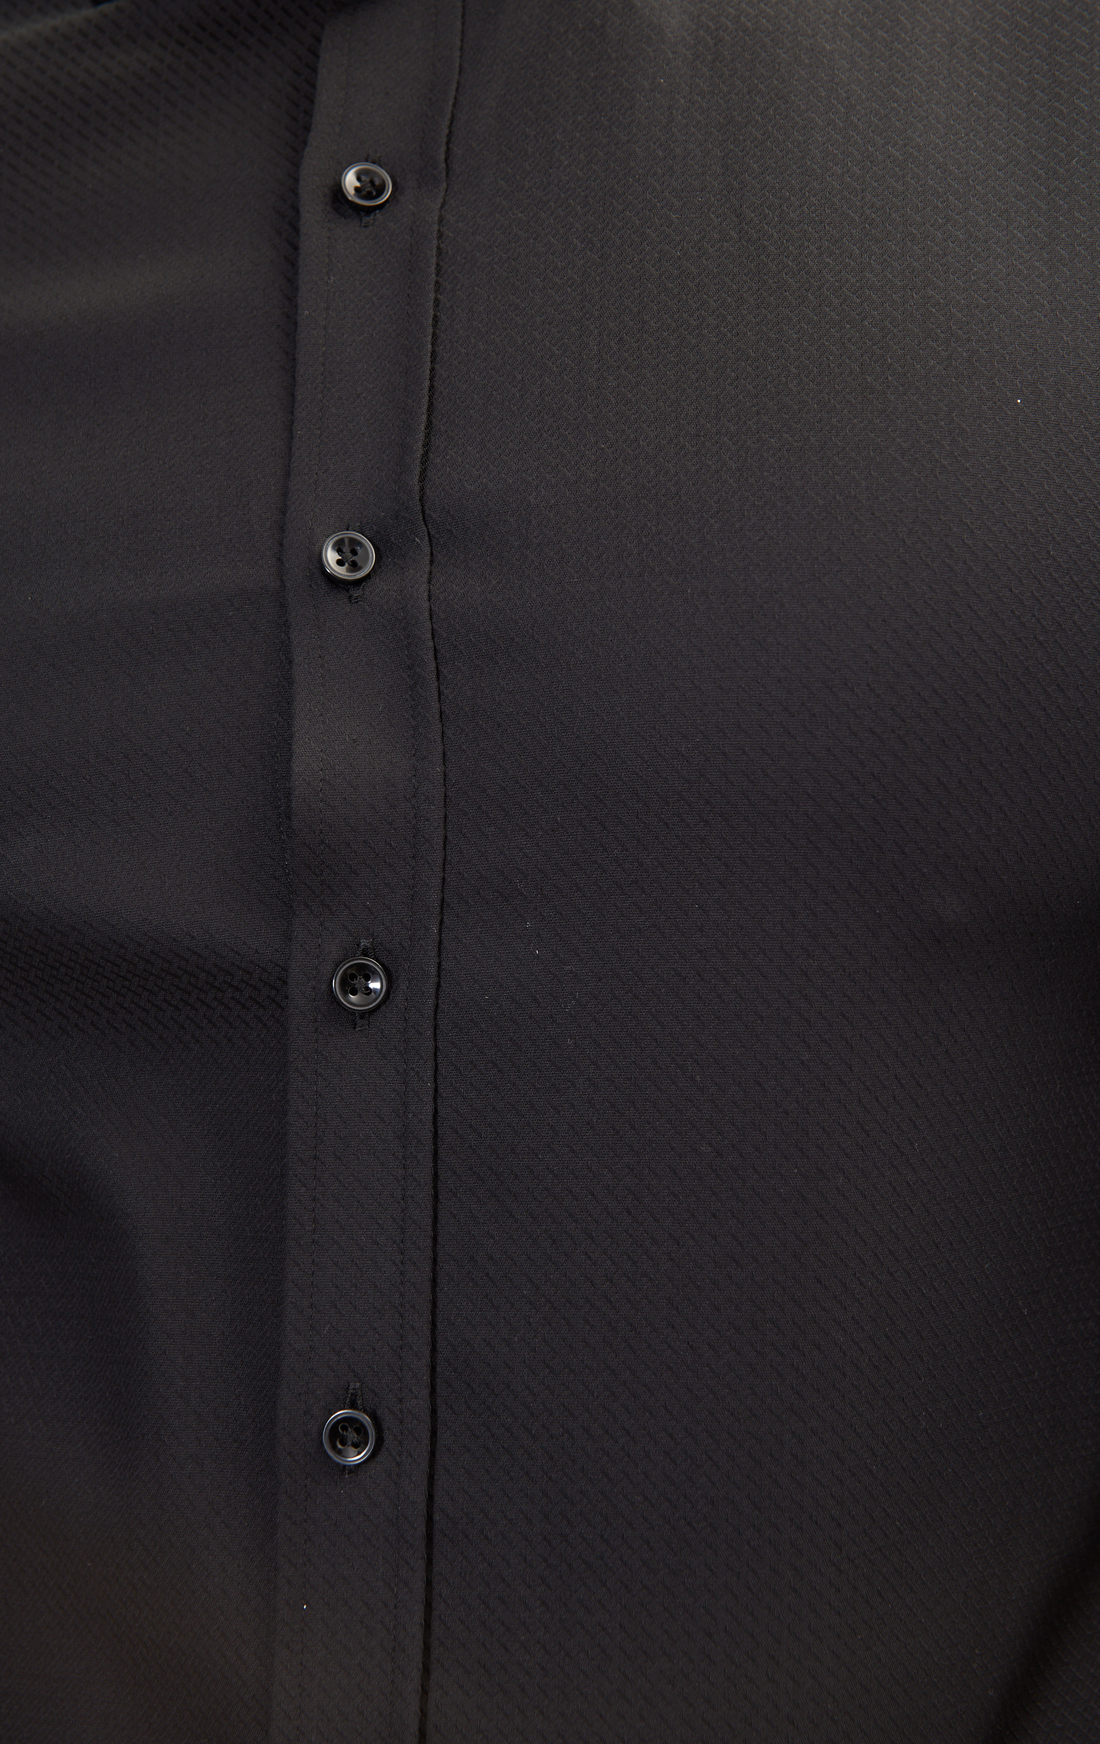 N° 4802A PURE COTTON FRONT PLACKET SPREAD COLLAR DRESS SHIRT - BLACK